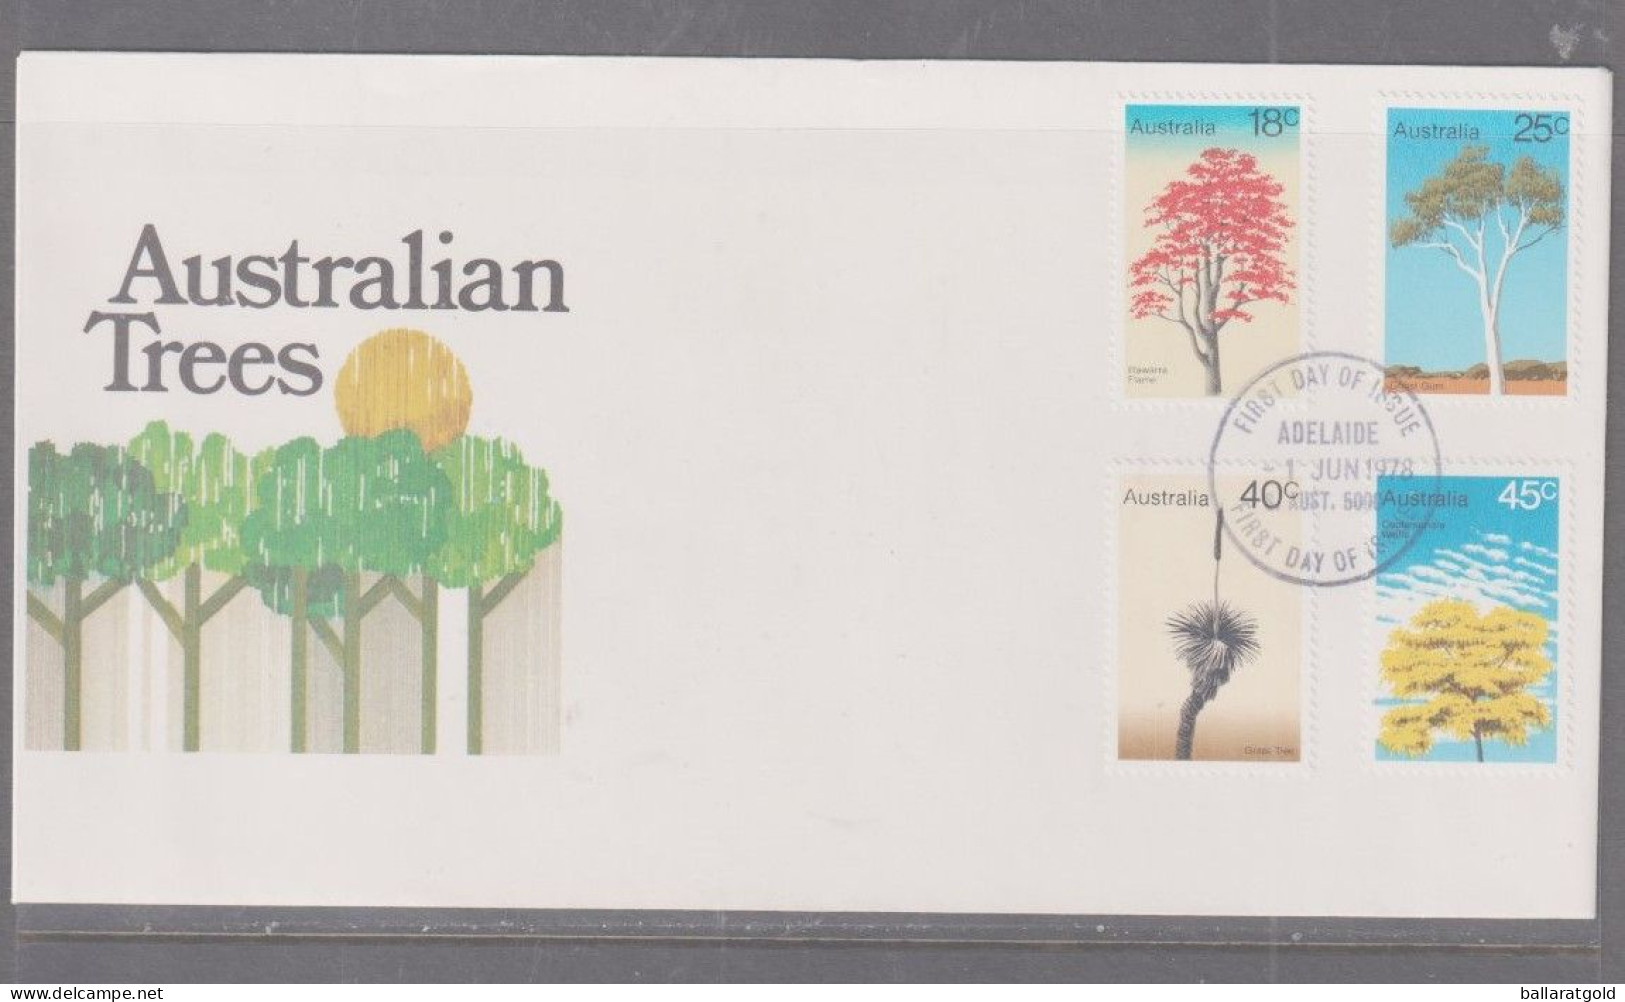 Australia 1978 Trees First Day Cover - Adelaide Cancellation - Covers & Documents